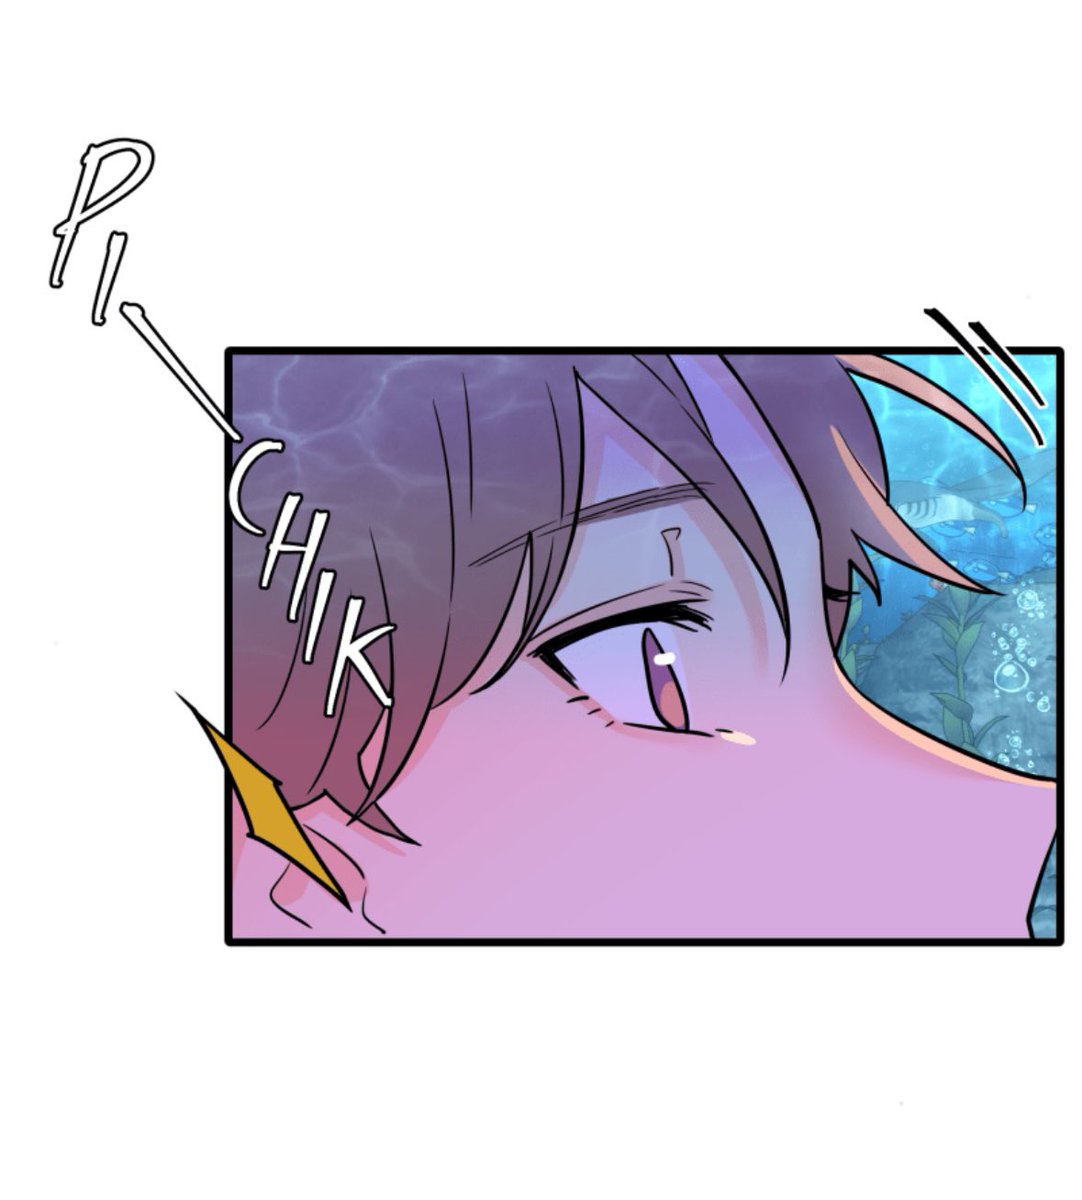 Anyways if you like aquarium dates you should read NOT SO SHOUJO LOVE STORY right now✨ I got permission from the author to post this sneak peek but wow this episode was so pretty🐟🐡